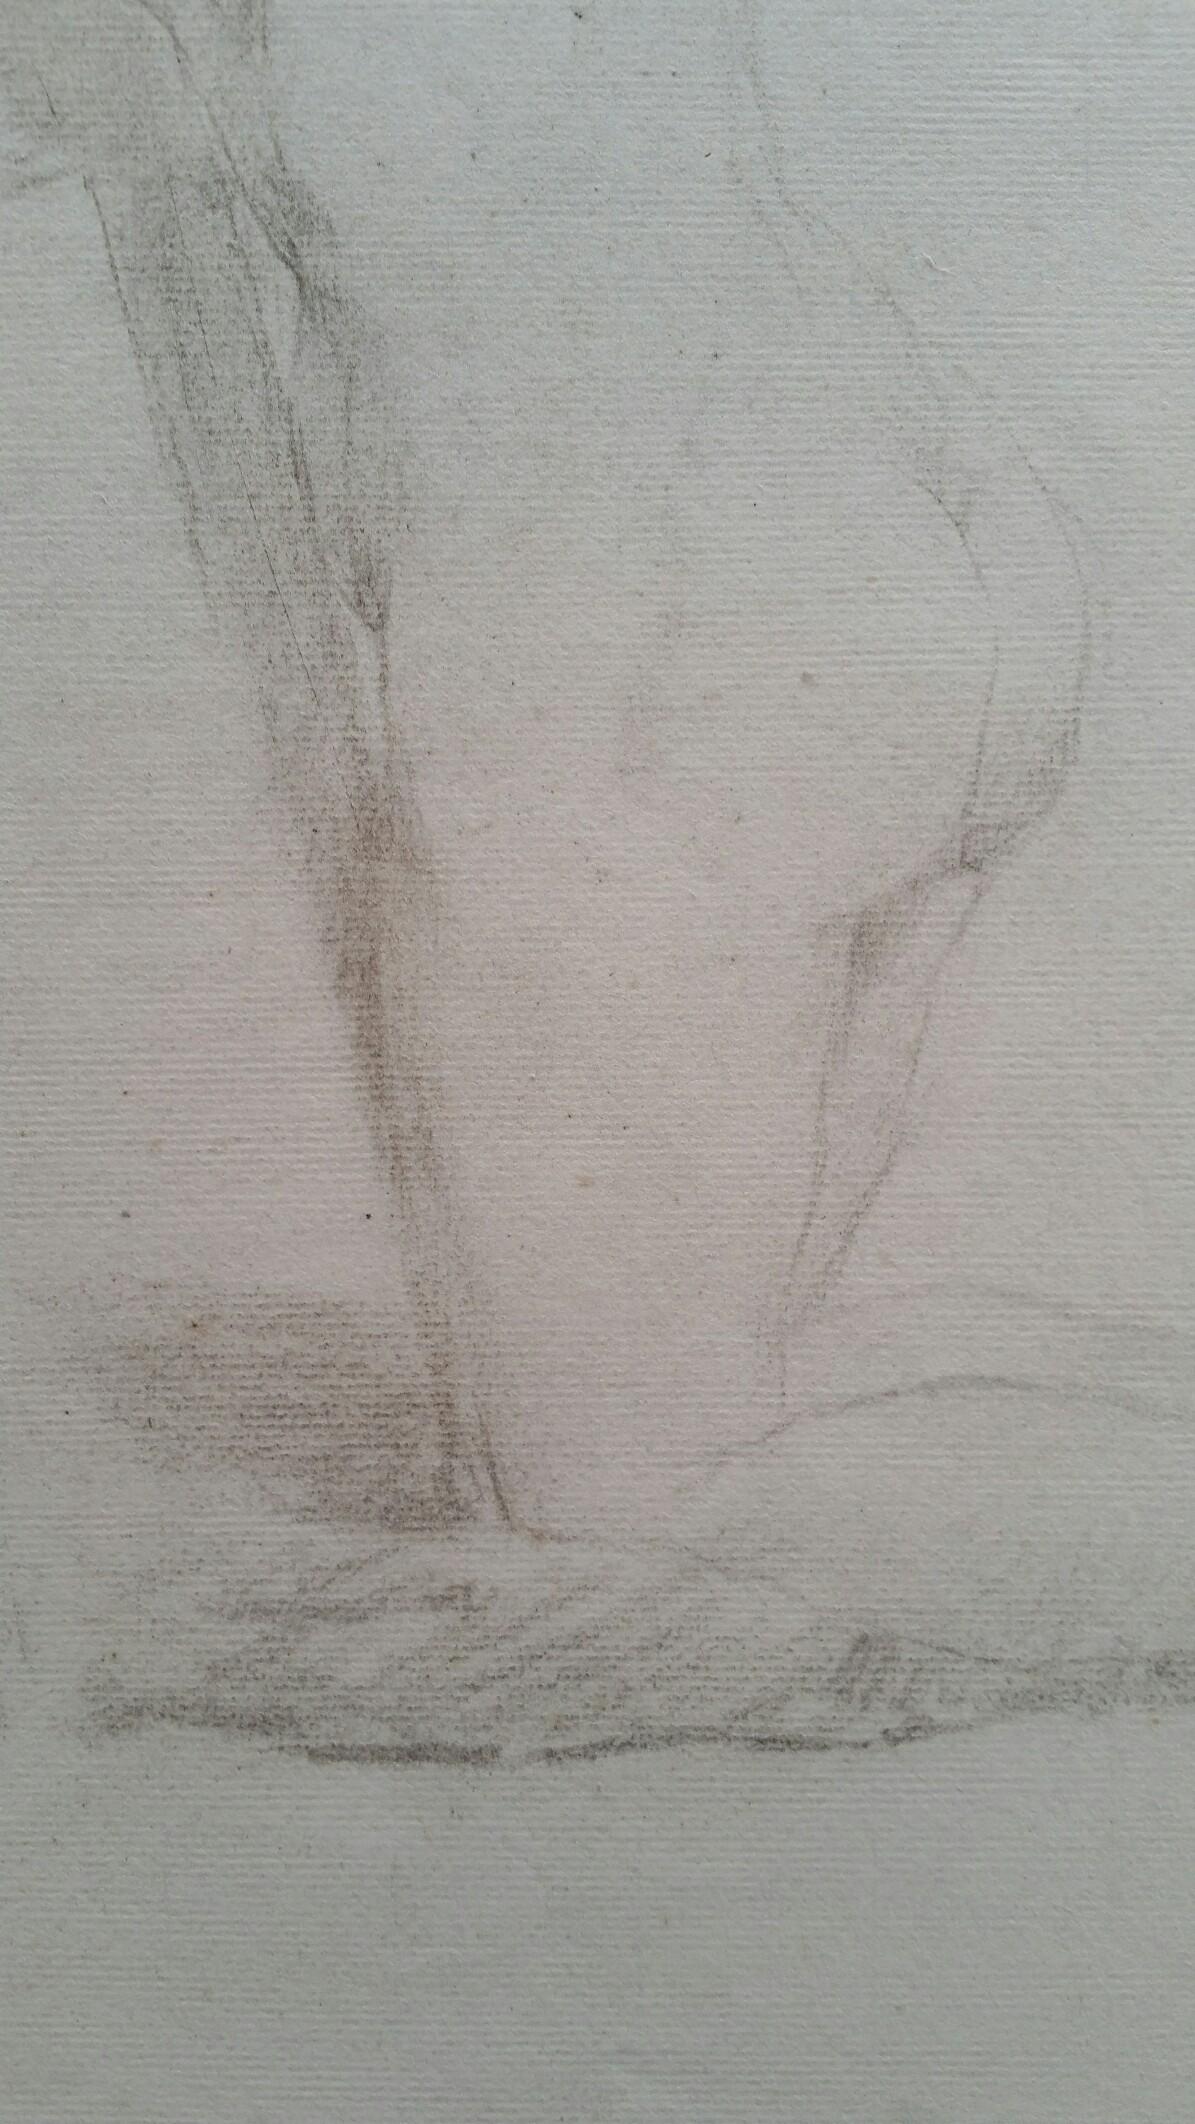 English Graphite Sketch of a Female Nude, Kneeling
by Henry George Moon (British 1857-1905)
on off white artists paper, unframed
measurements: sheet 18.75 x 12 inches 

provenance: from the artists estate

Condition report: pin holes to corners